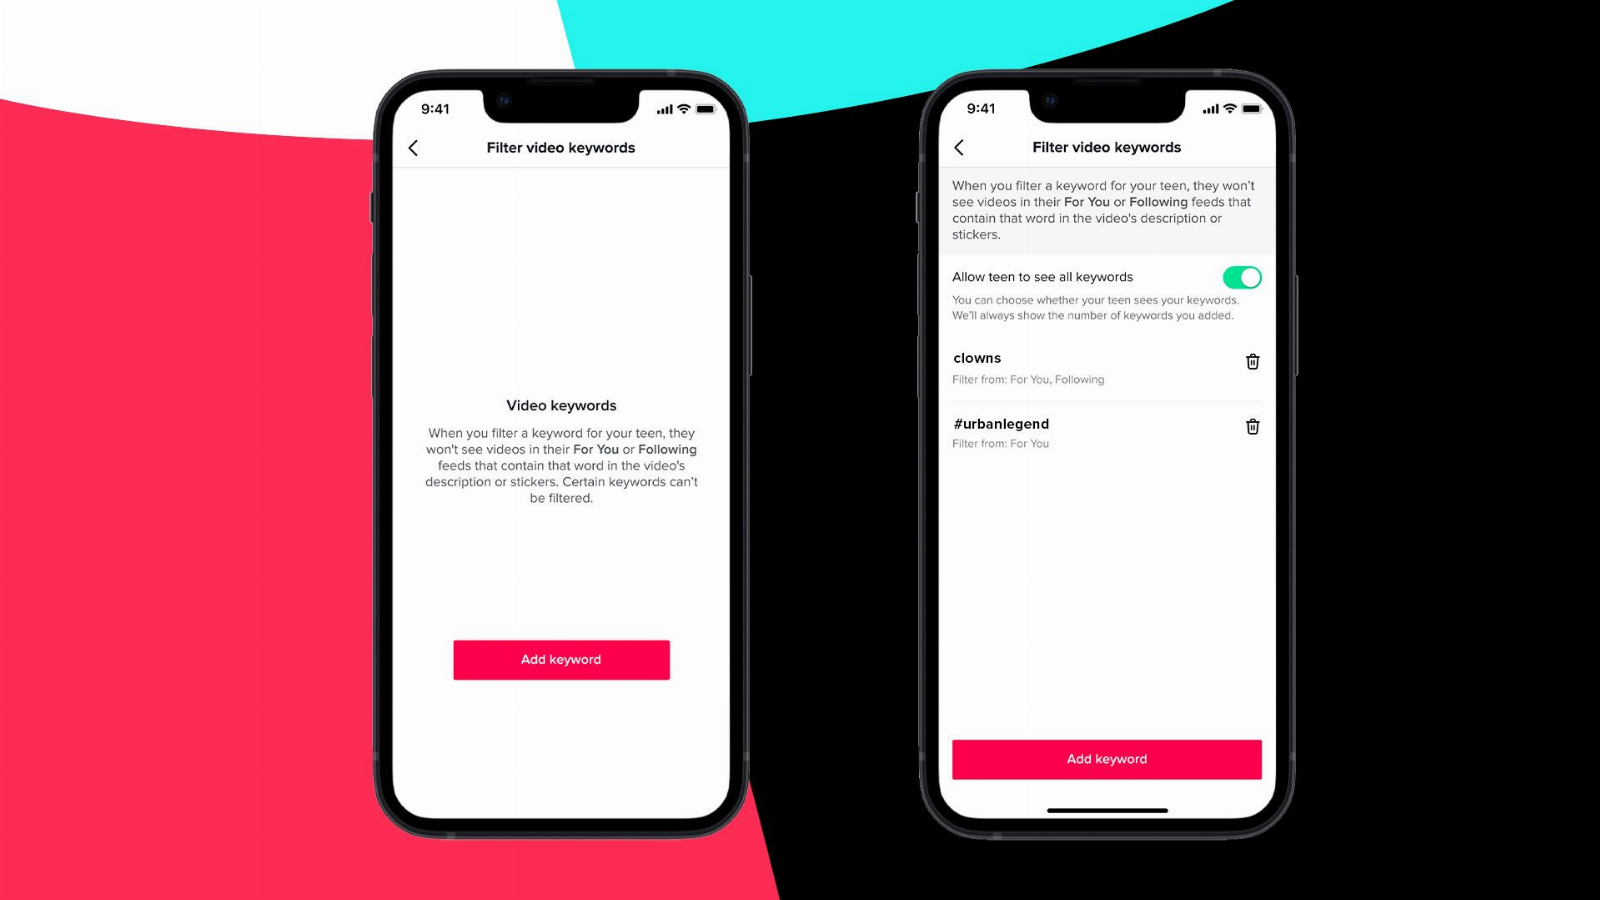 TikTok’s Family Pairing tool now gives parents personalized control over the content their teens see